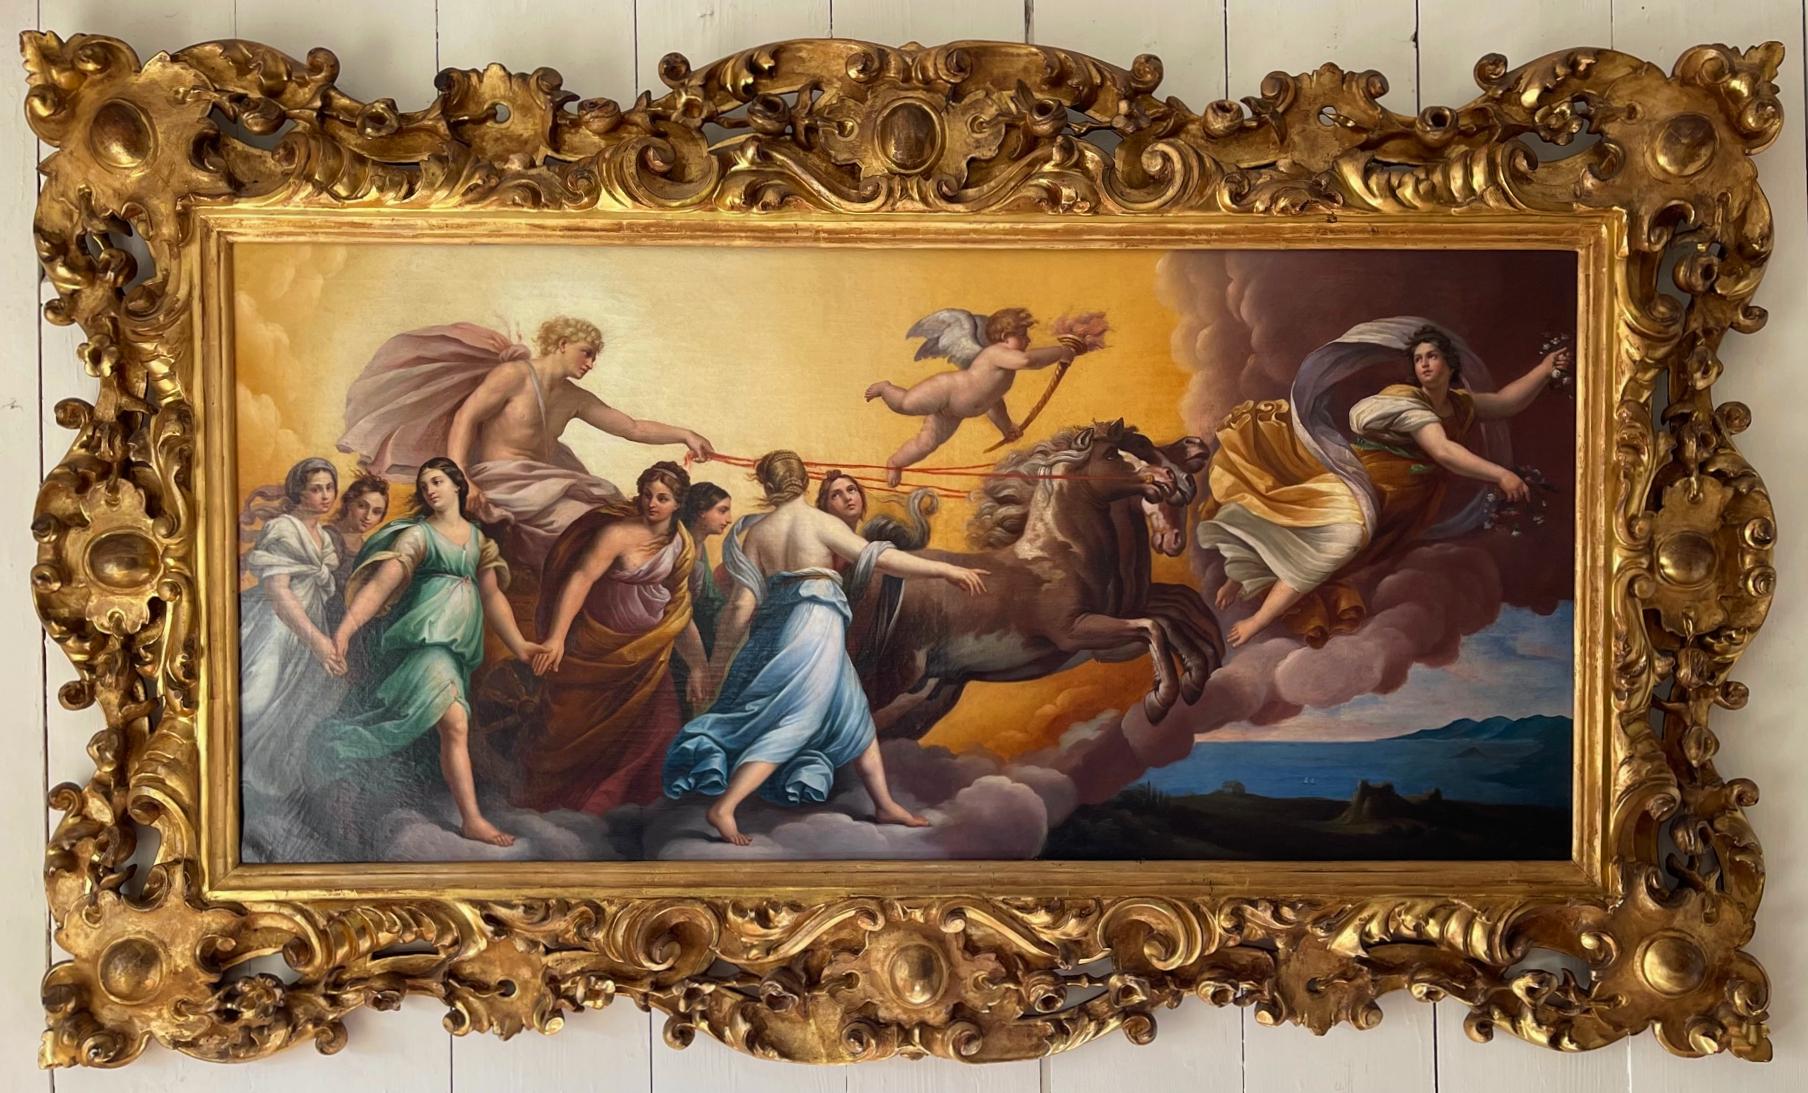 After Guido Reni, 19th Century
L’Aurora
oil on canvas
21 x 43 ⅝ in. (53.3 x 110.8 cm.)
frame 32 ¼ x 55 in. (81.9 x 139.7 cm.)

After the fresco in the Casino dell’Aurora, Rome.

Presented in a carved gilt-wood Florentine frame.

Guido Reni’s